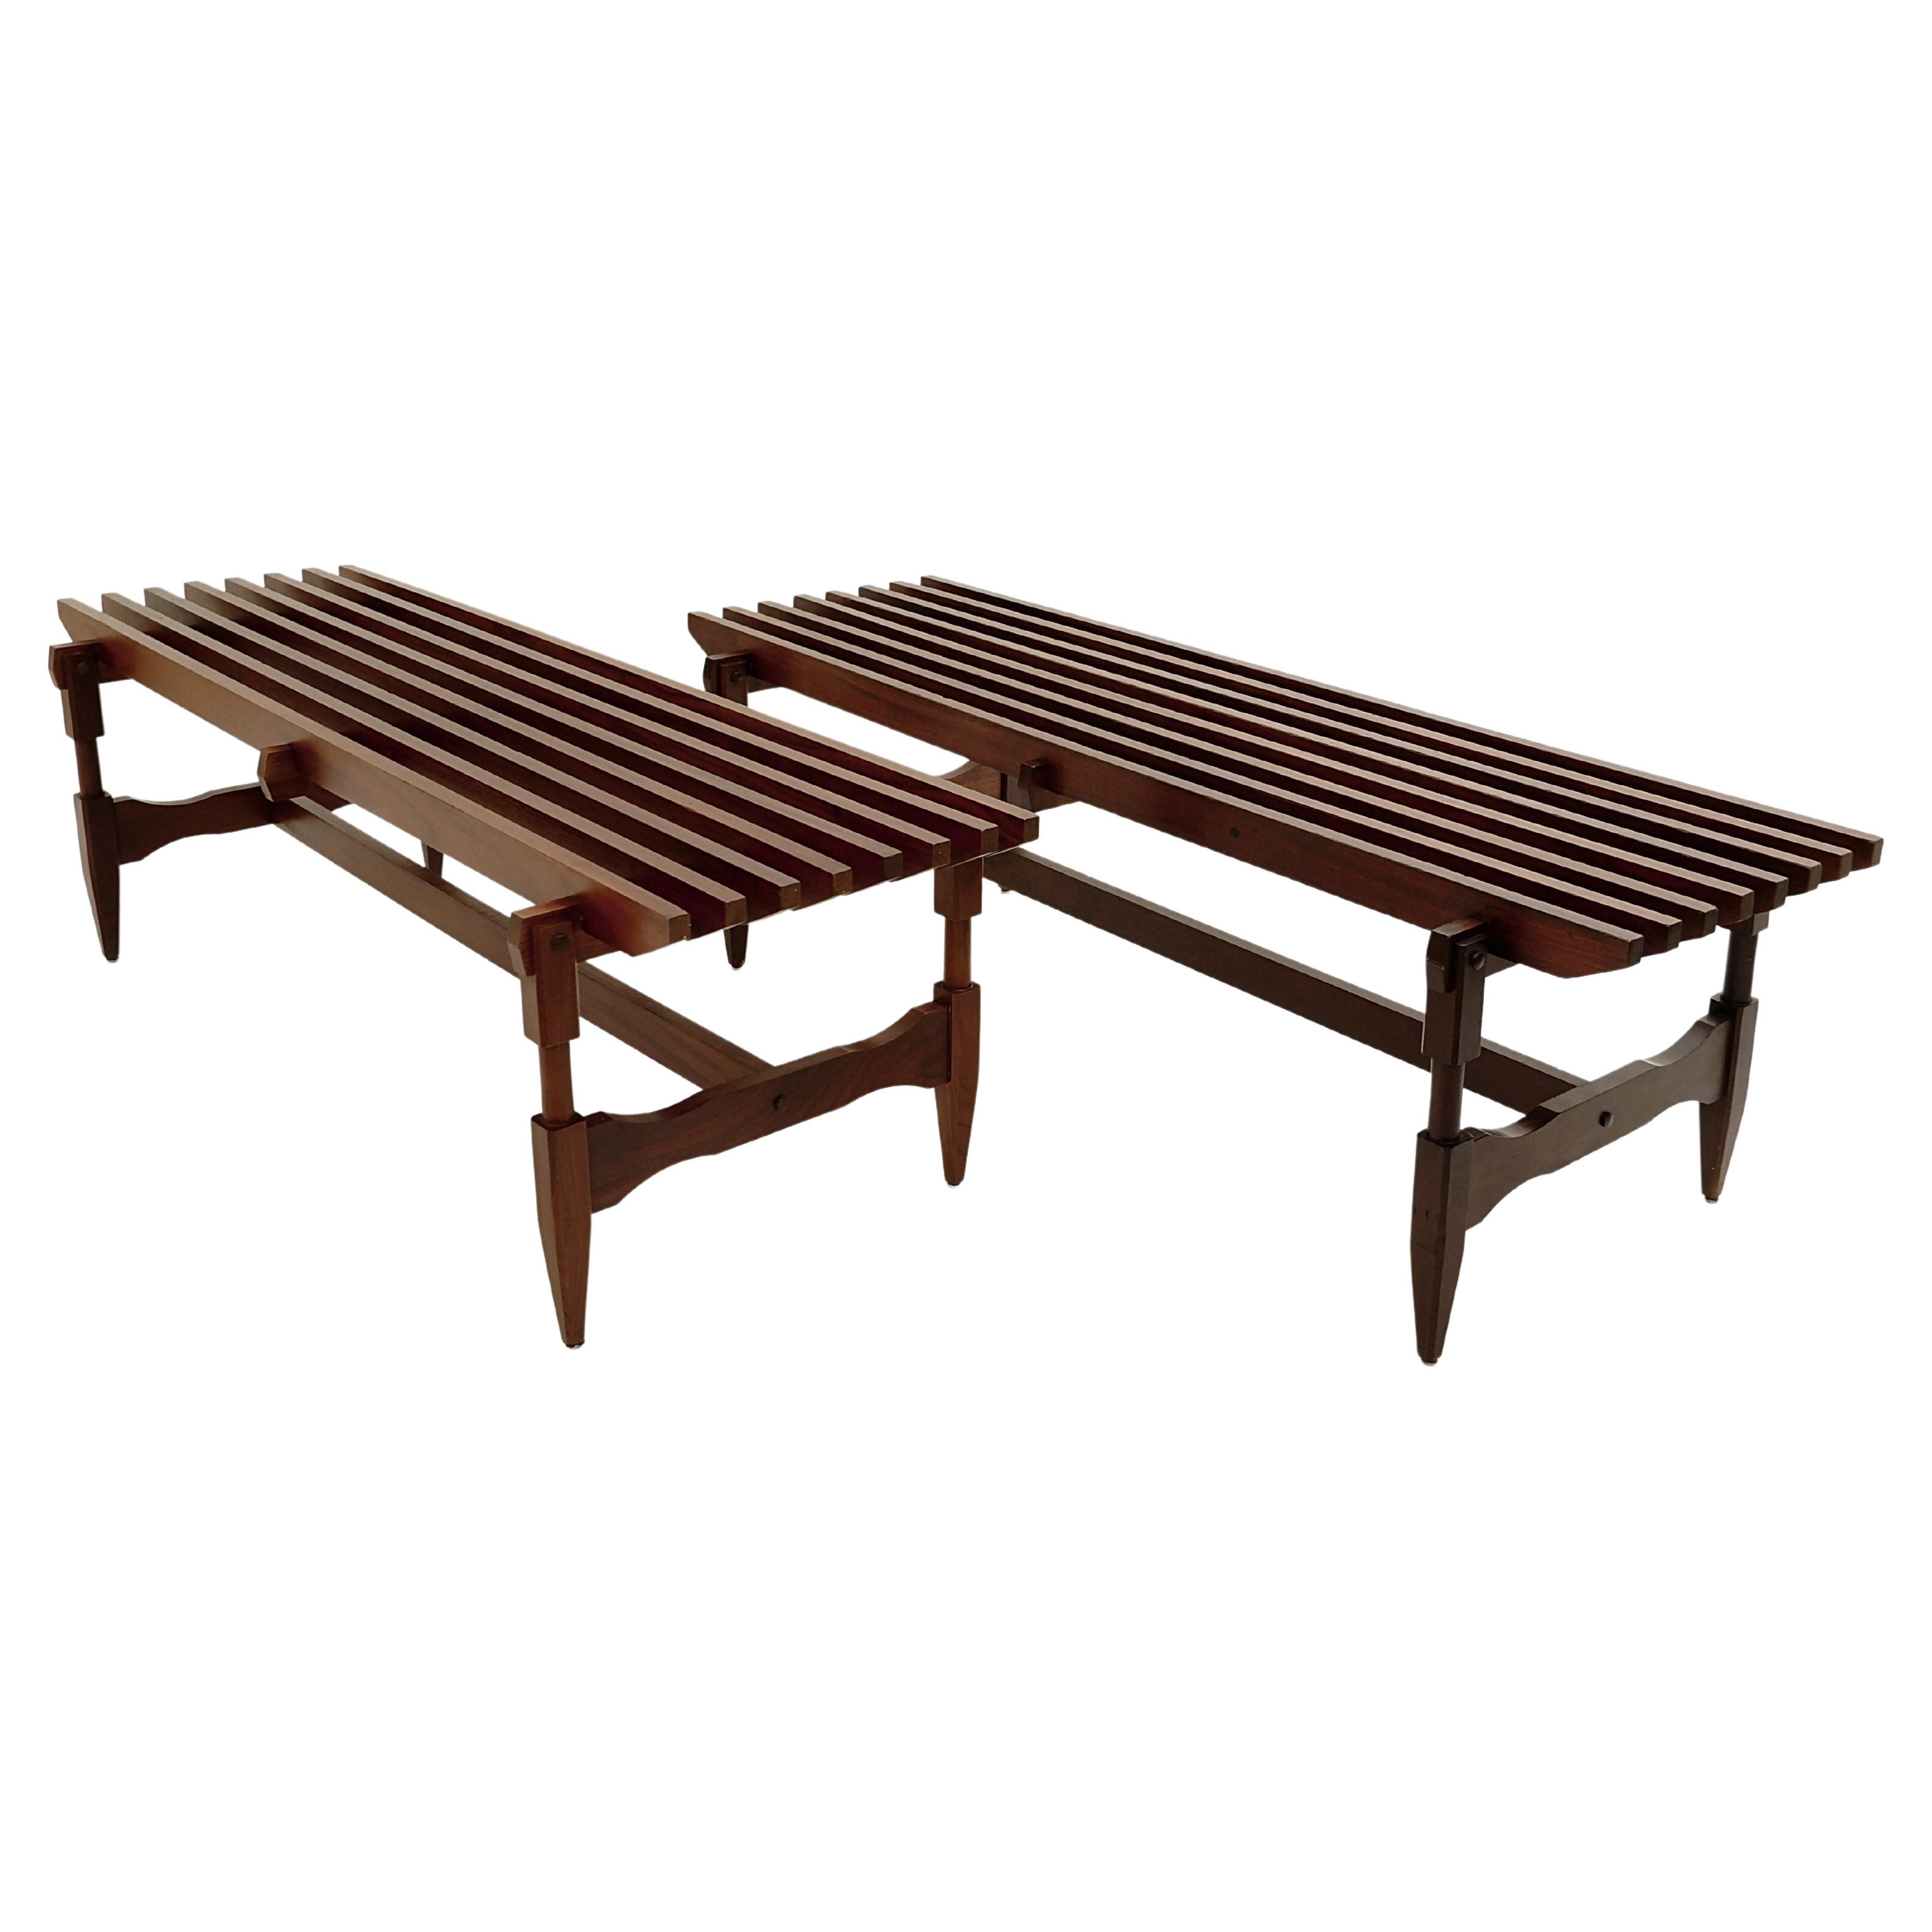 Pair of Mid-century wood Bench by Ico & Luisa Parisi - 1950s For Sale